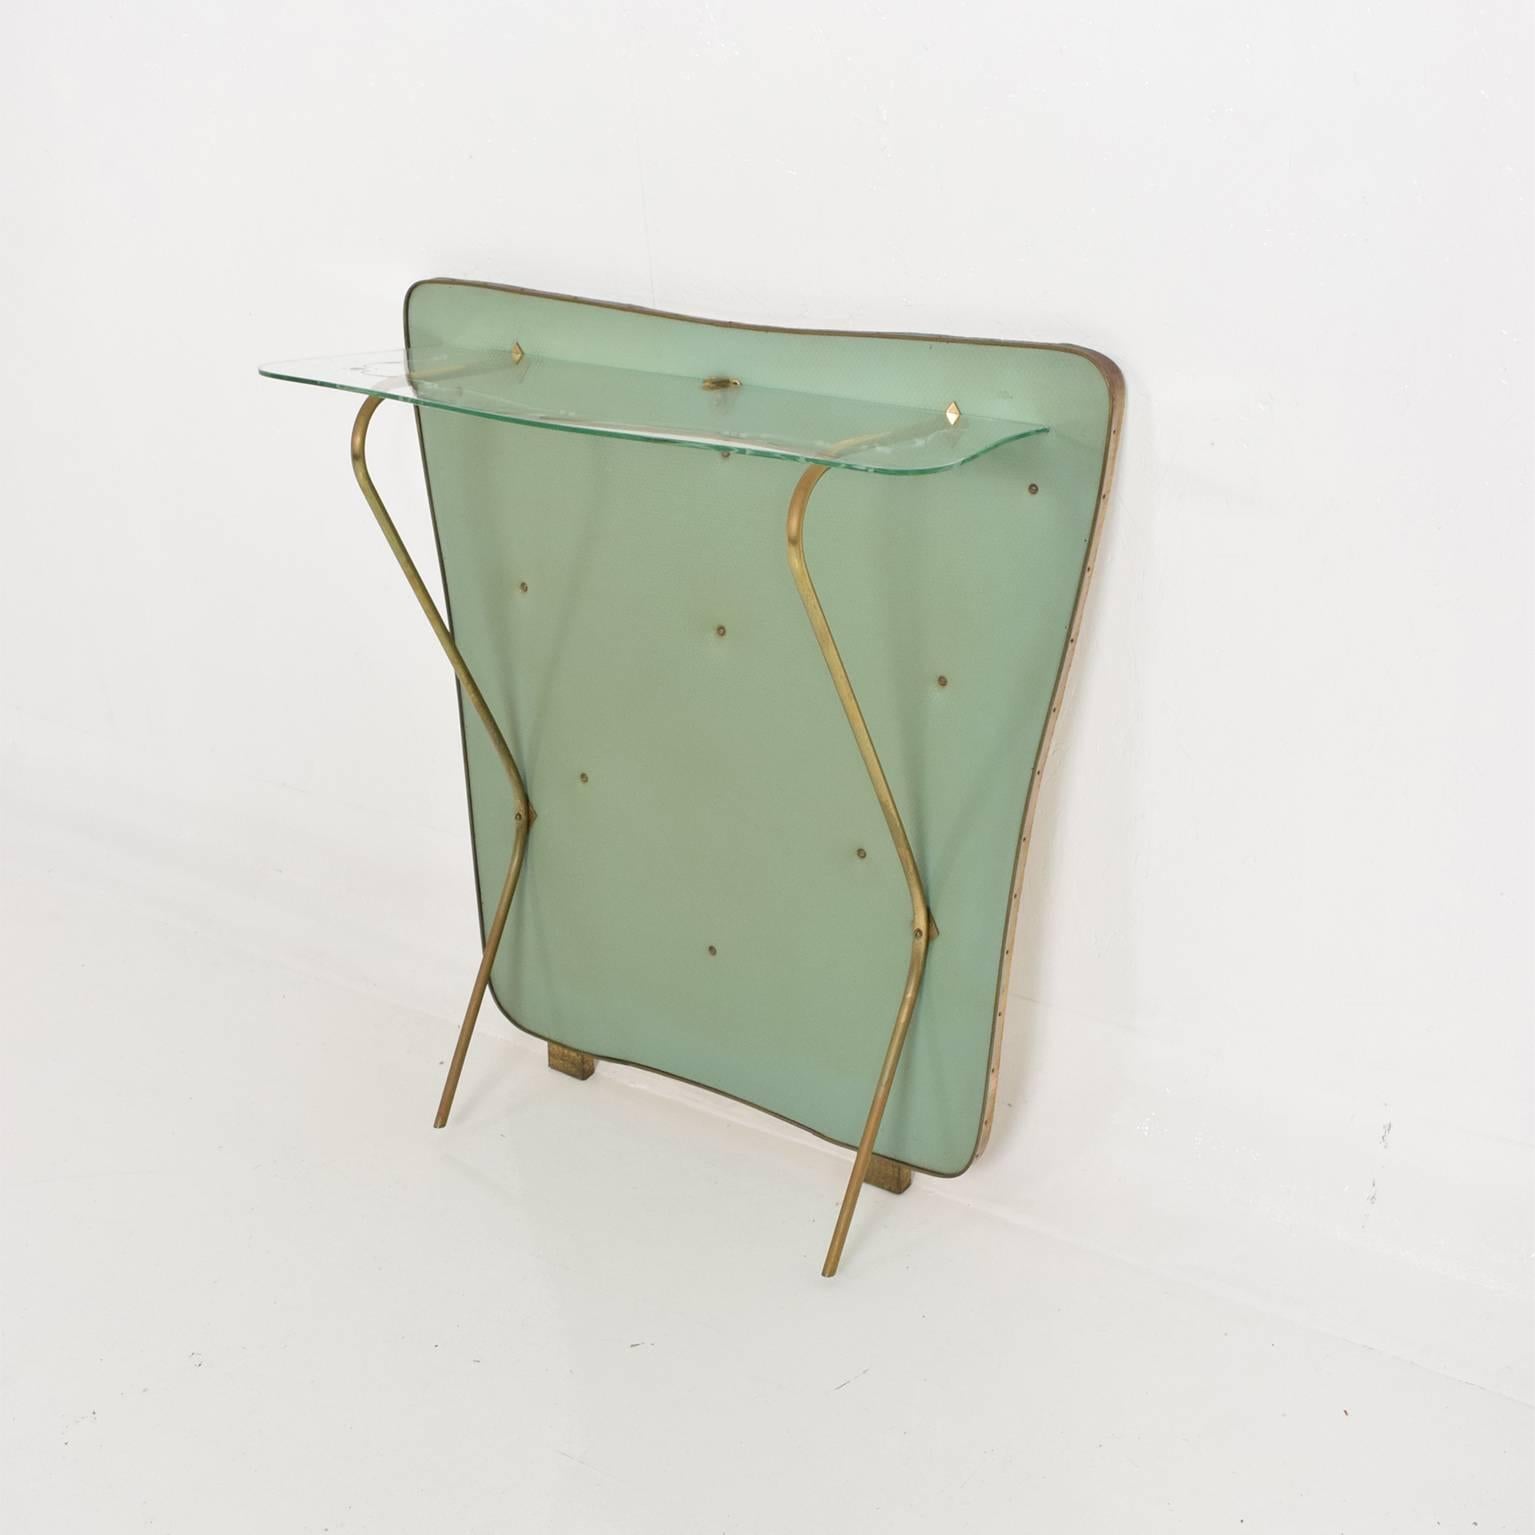 For your consideration a Mid-Century Modern wall console. Made in Italy, circa late 1950s.
Wood board with original green vinyl cover. Brass frame, legs, and brackets support the sculptural original glass.

Dimensions: 32 1/2